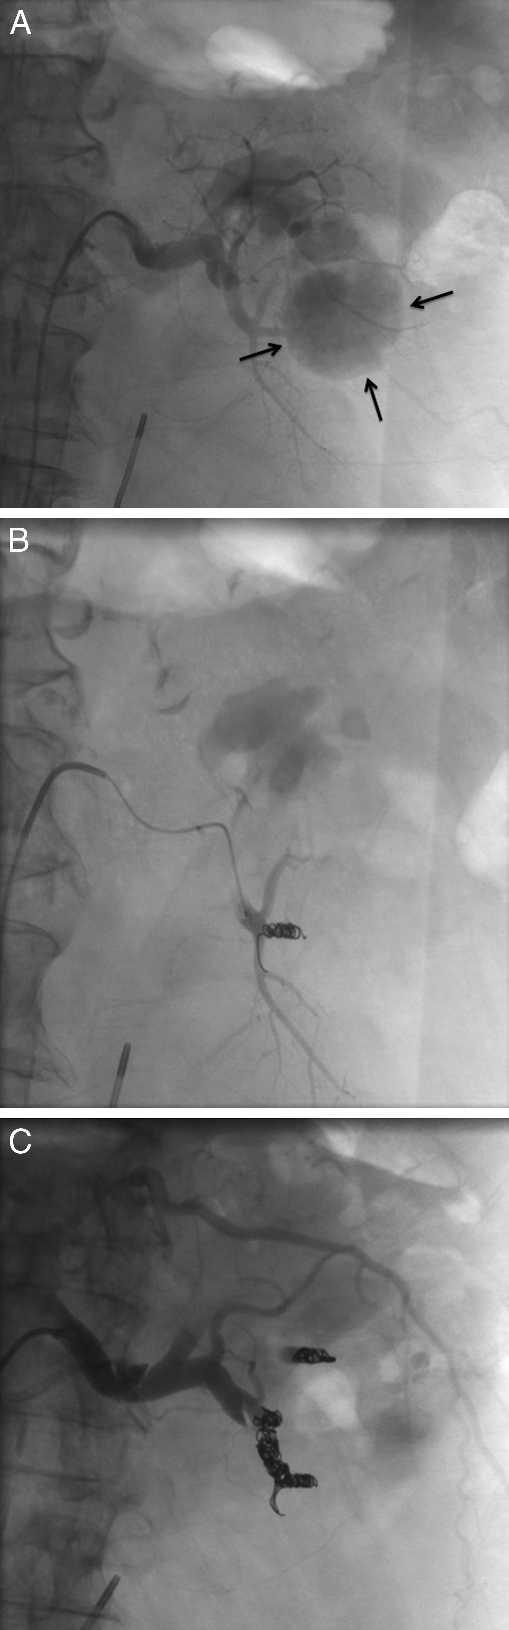 Irwine, C patient s clinical presentation, suggested a renal artery pseudoaneurysm as opposed to arteriovenous fistula. Interventional Radiology was consulted.